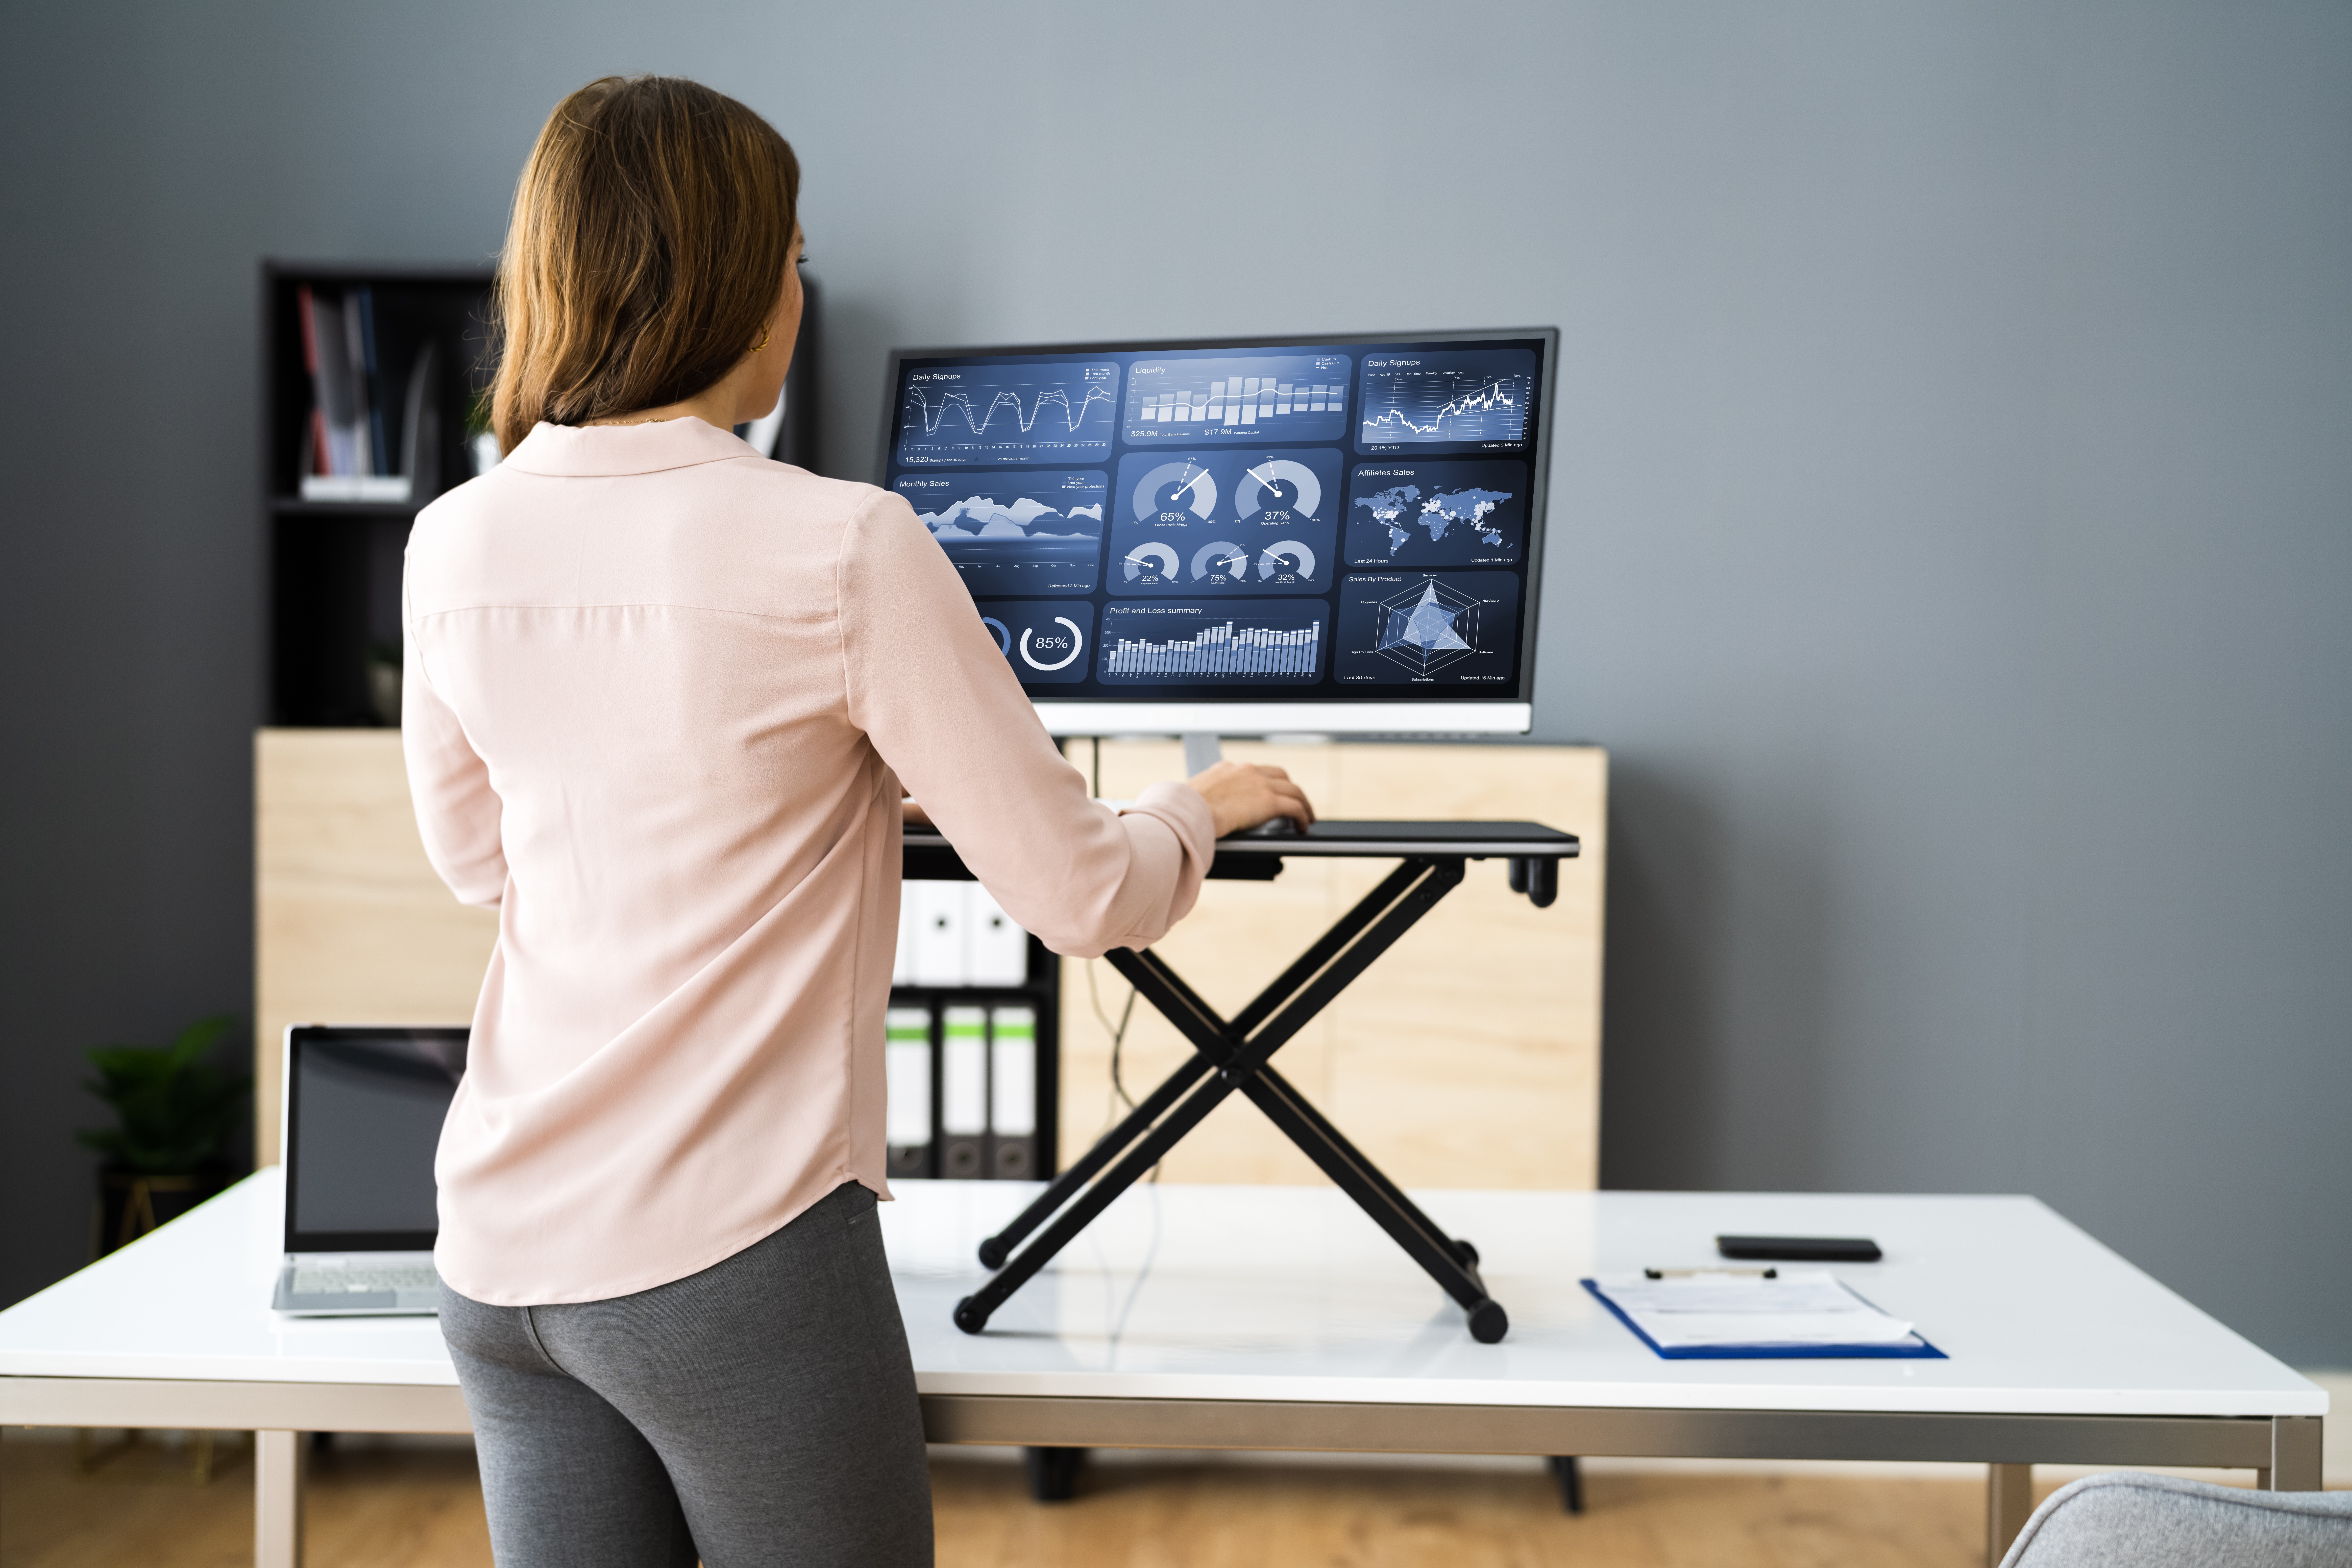 Companies will adopt hybrid or flexible work arrangements, according to a survey conducted by fitness apparel maker Lululemon Athletica. Photo: Shutterstock